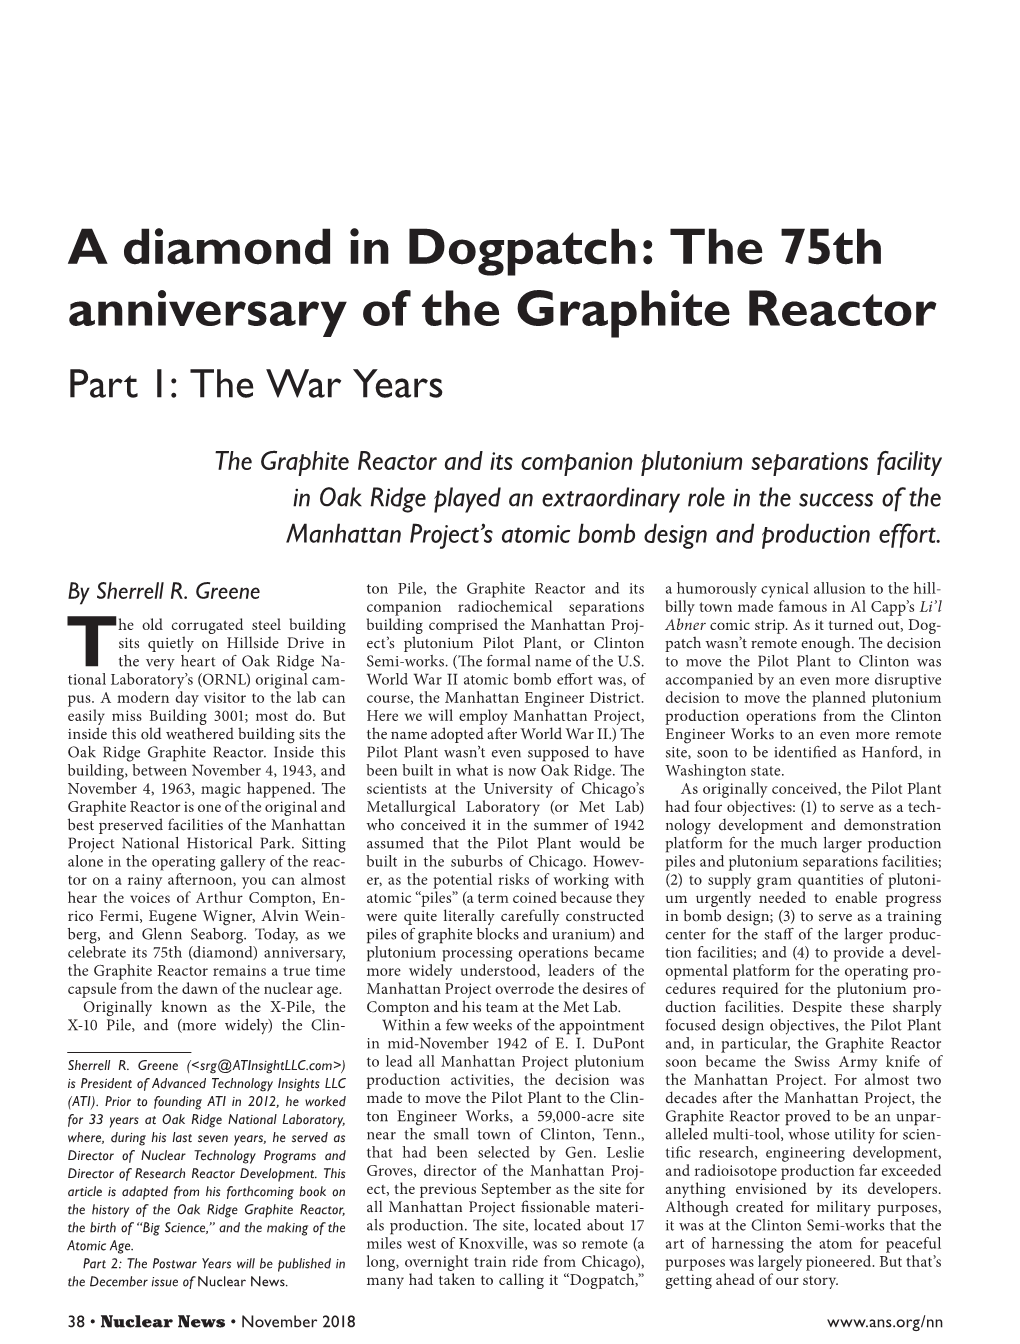 A Diamond in Dogpatch: the 75Th Anniversary of the Graphite Reactor Part 1: the War Years